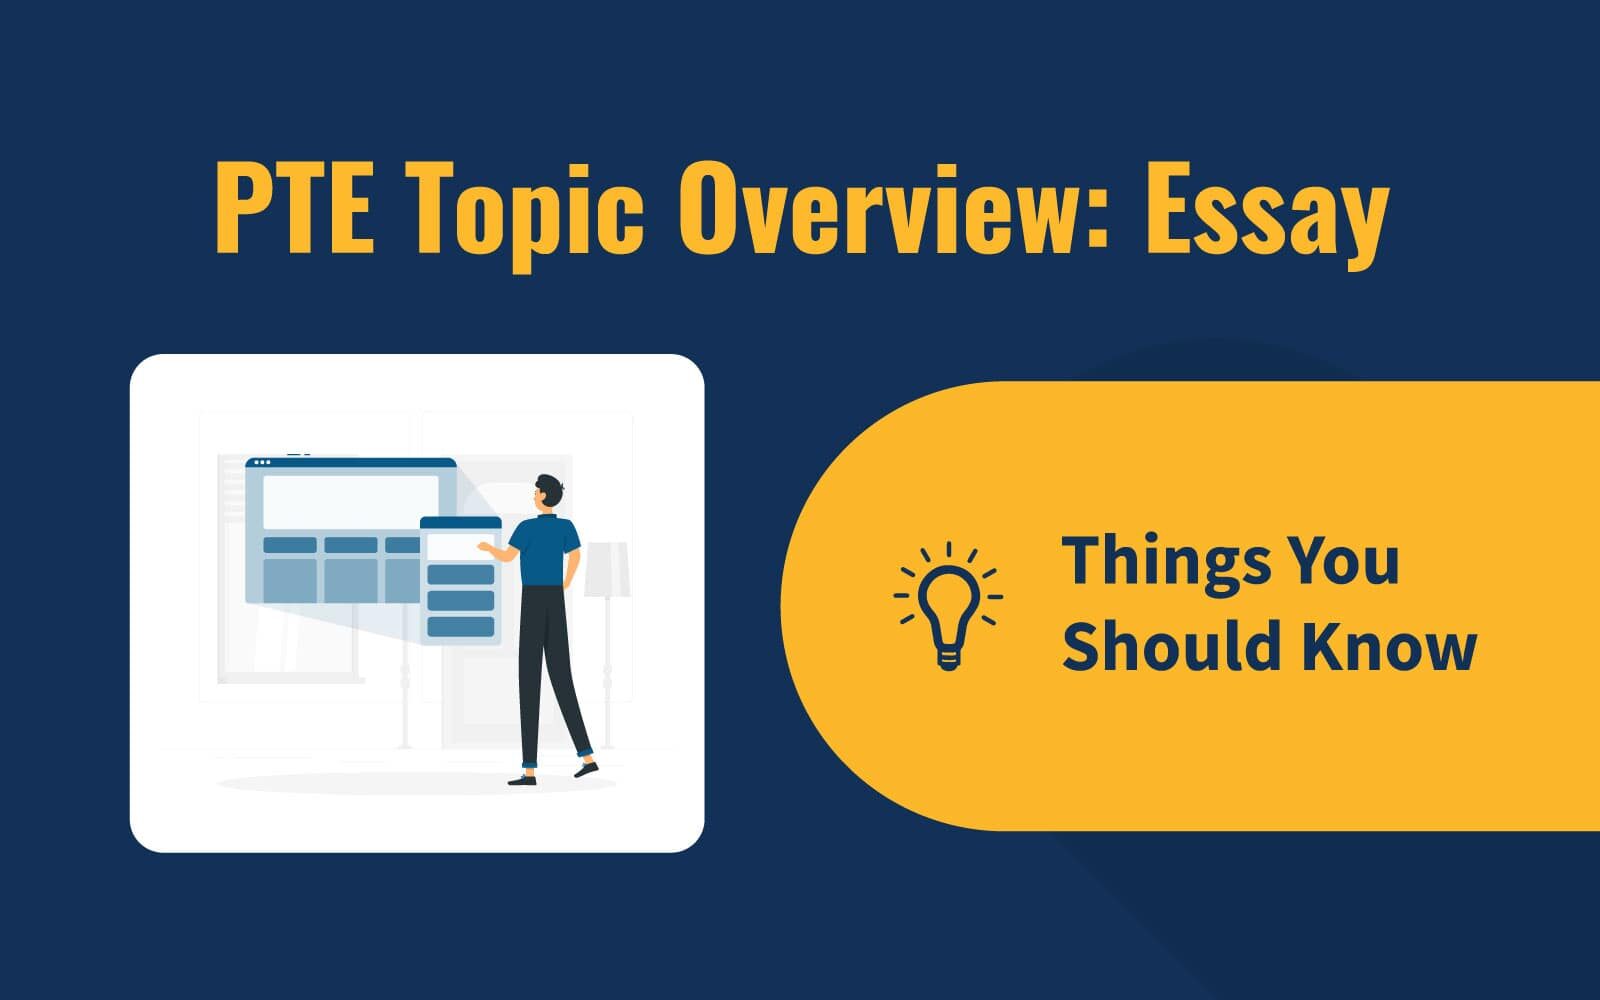 PTE Topic Overview: Essay